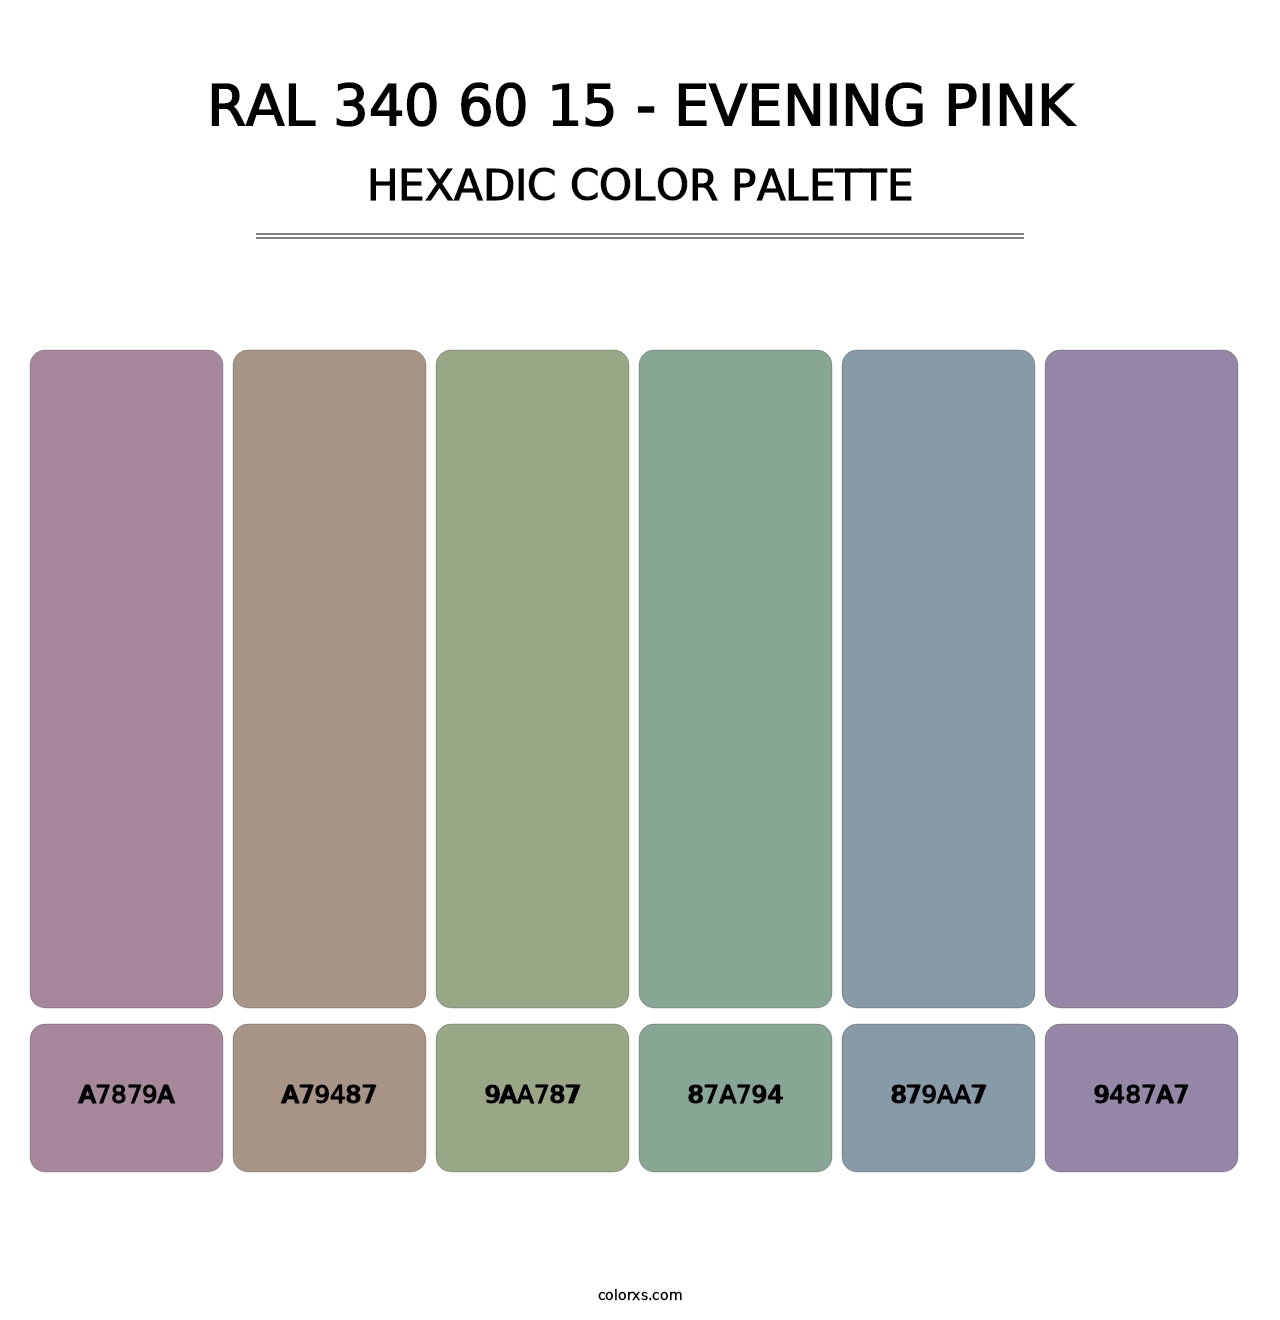 RAL 340 60 15 - Evening Pink - Hexadic Color Palette